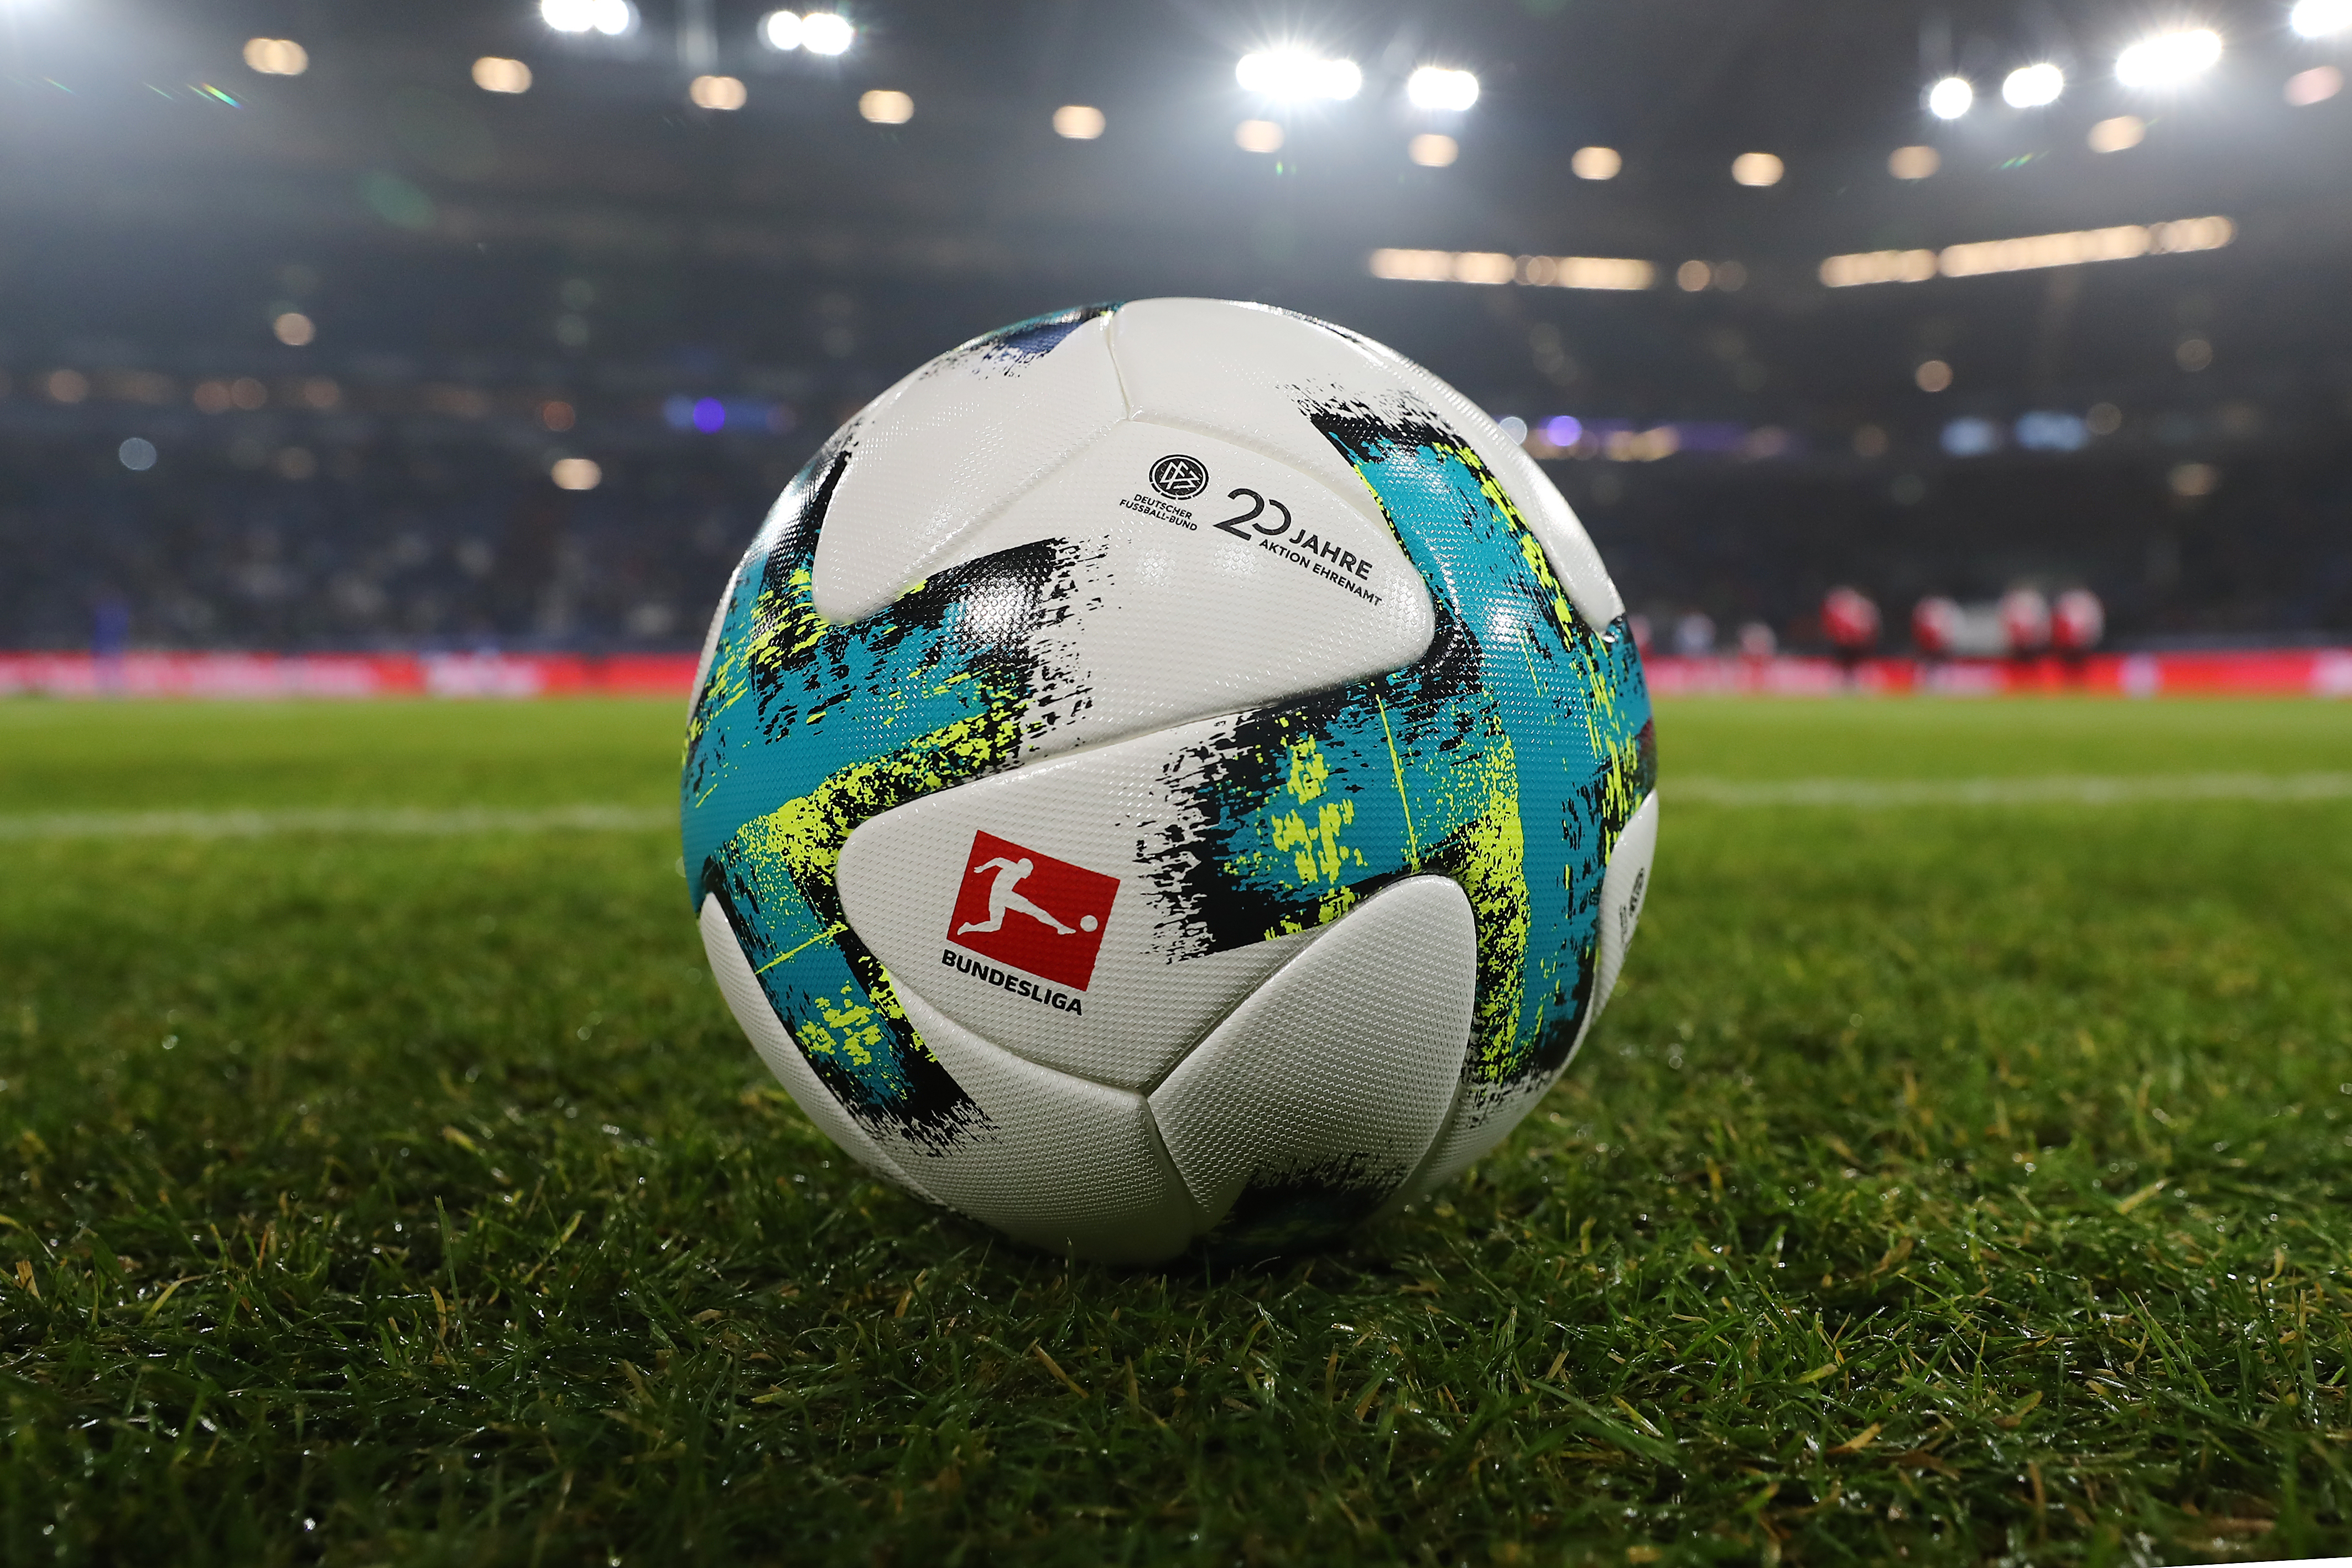 GELSENKIRCHEN, GERMANY - DECEMBER 02: the match ball with a logo in celebration of 20 years of volunteers during the Bundesliga match between FC Schalke 04 and 1. FC Koeln at Veltins-Arena on December 2, 2017 in Gelsenkirchen, Germany. (Photo by Christof Koepsel/Bongarts/Getty Images)